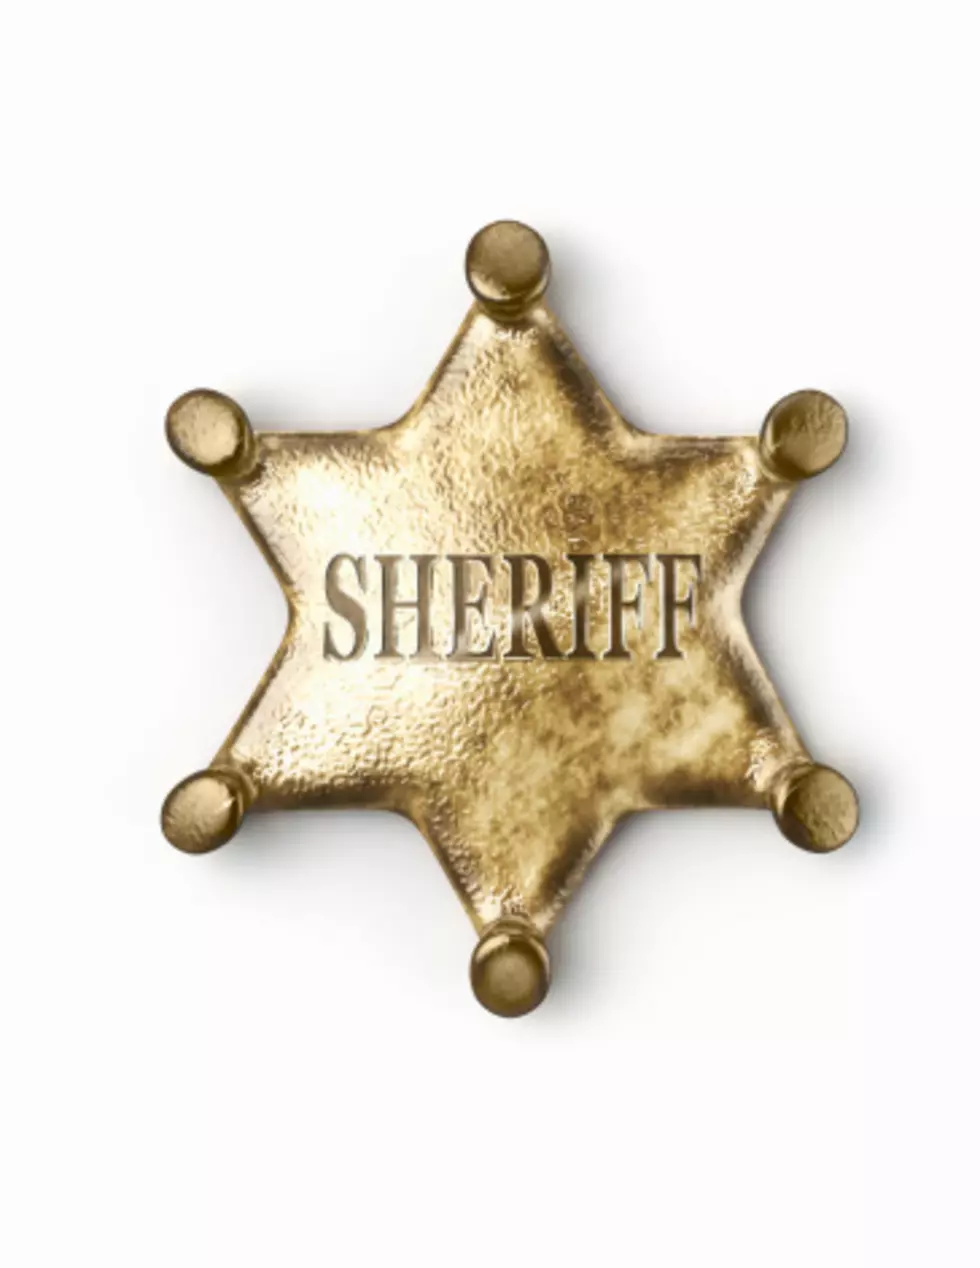 Police and Sheriff Report for Monday, Sept. 14, 2015